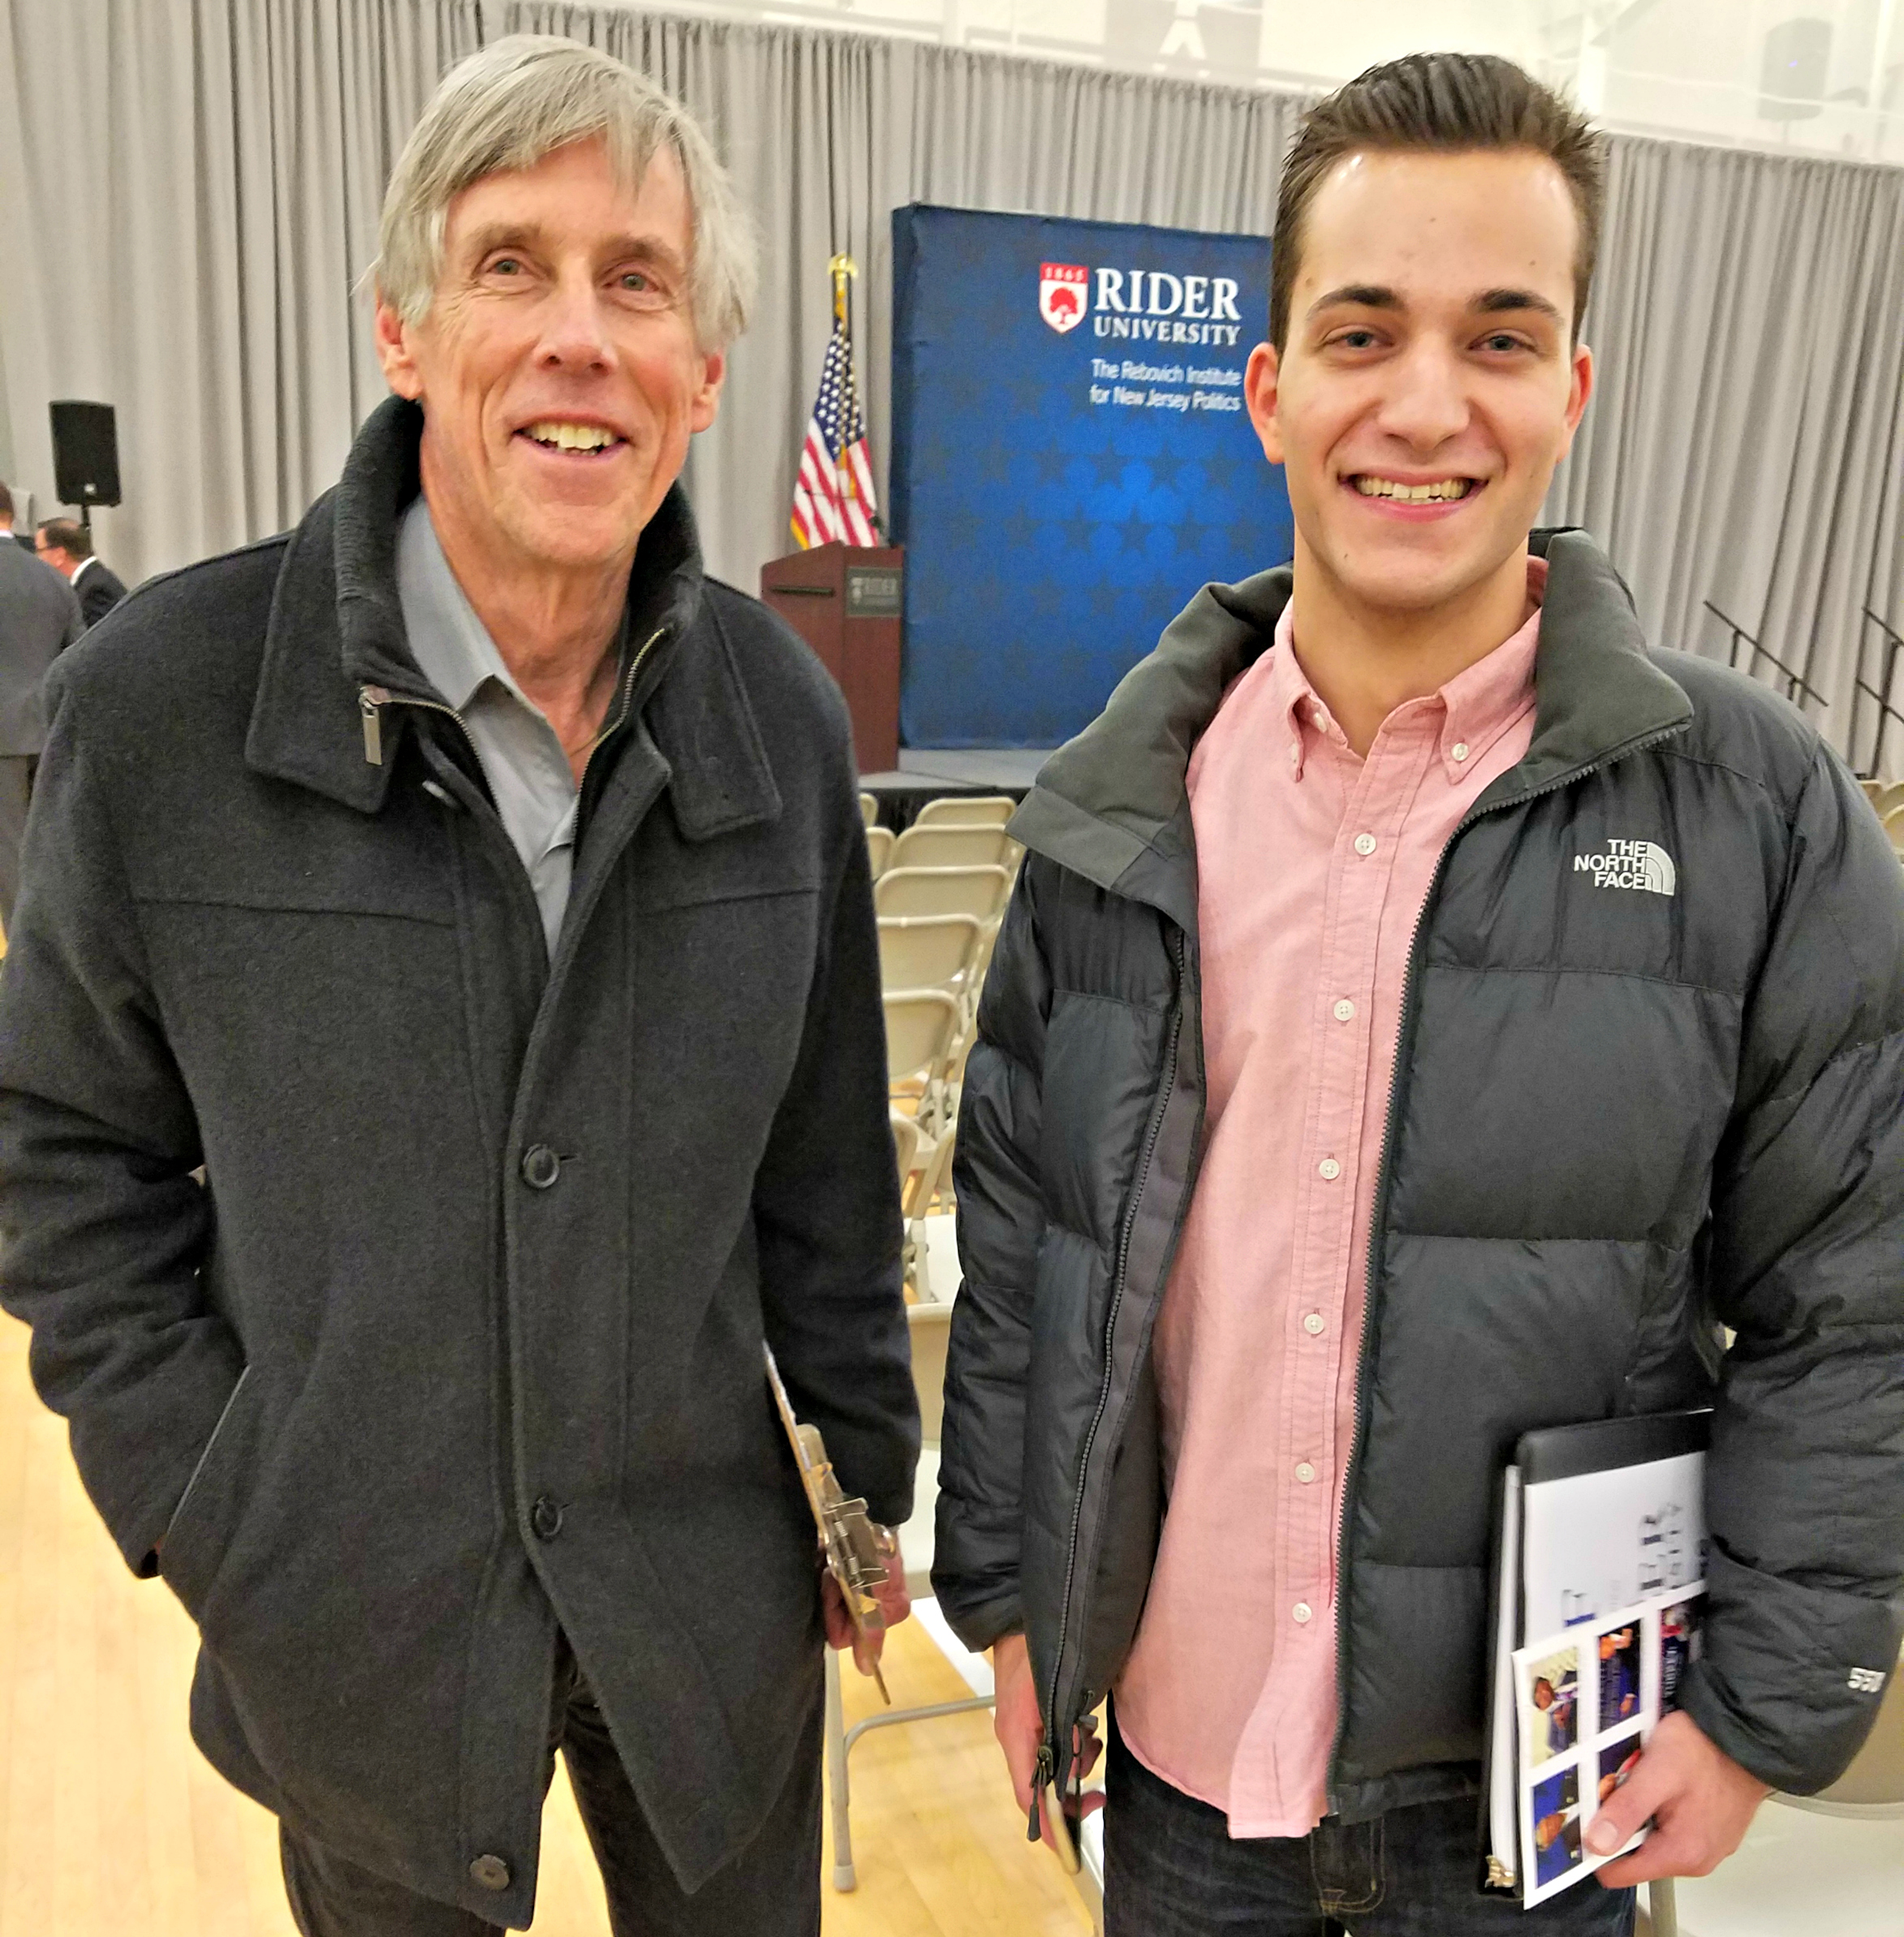 Tom Simonet, a professor of journalism at Rider University, after the Gingrich speech with journalism major Brandon Scalea from Marlboro, New Jersey. (Photo: Kevin Mooney/The Daily Signal) 